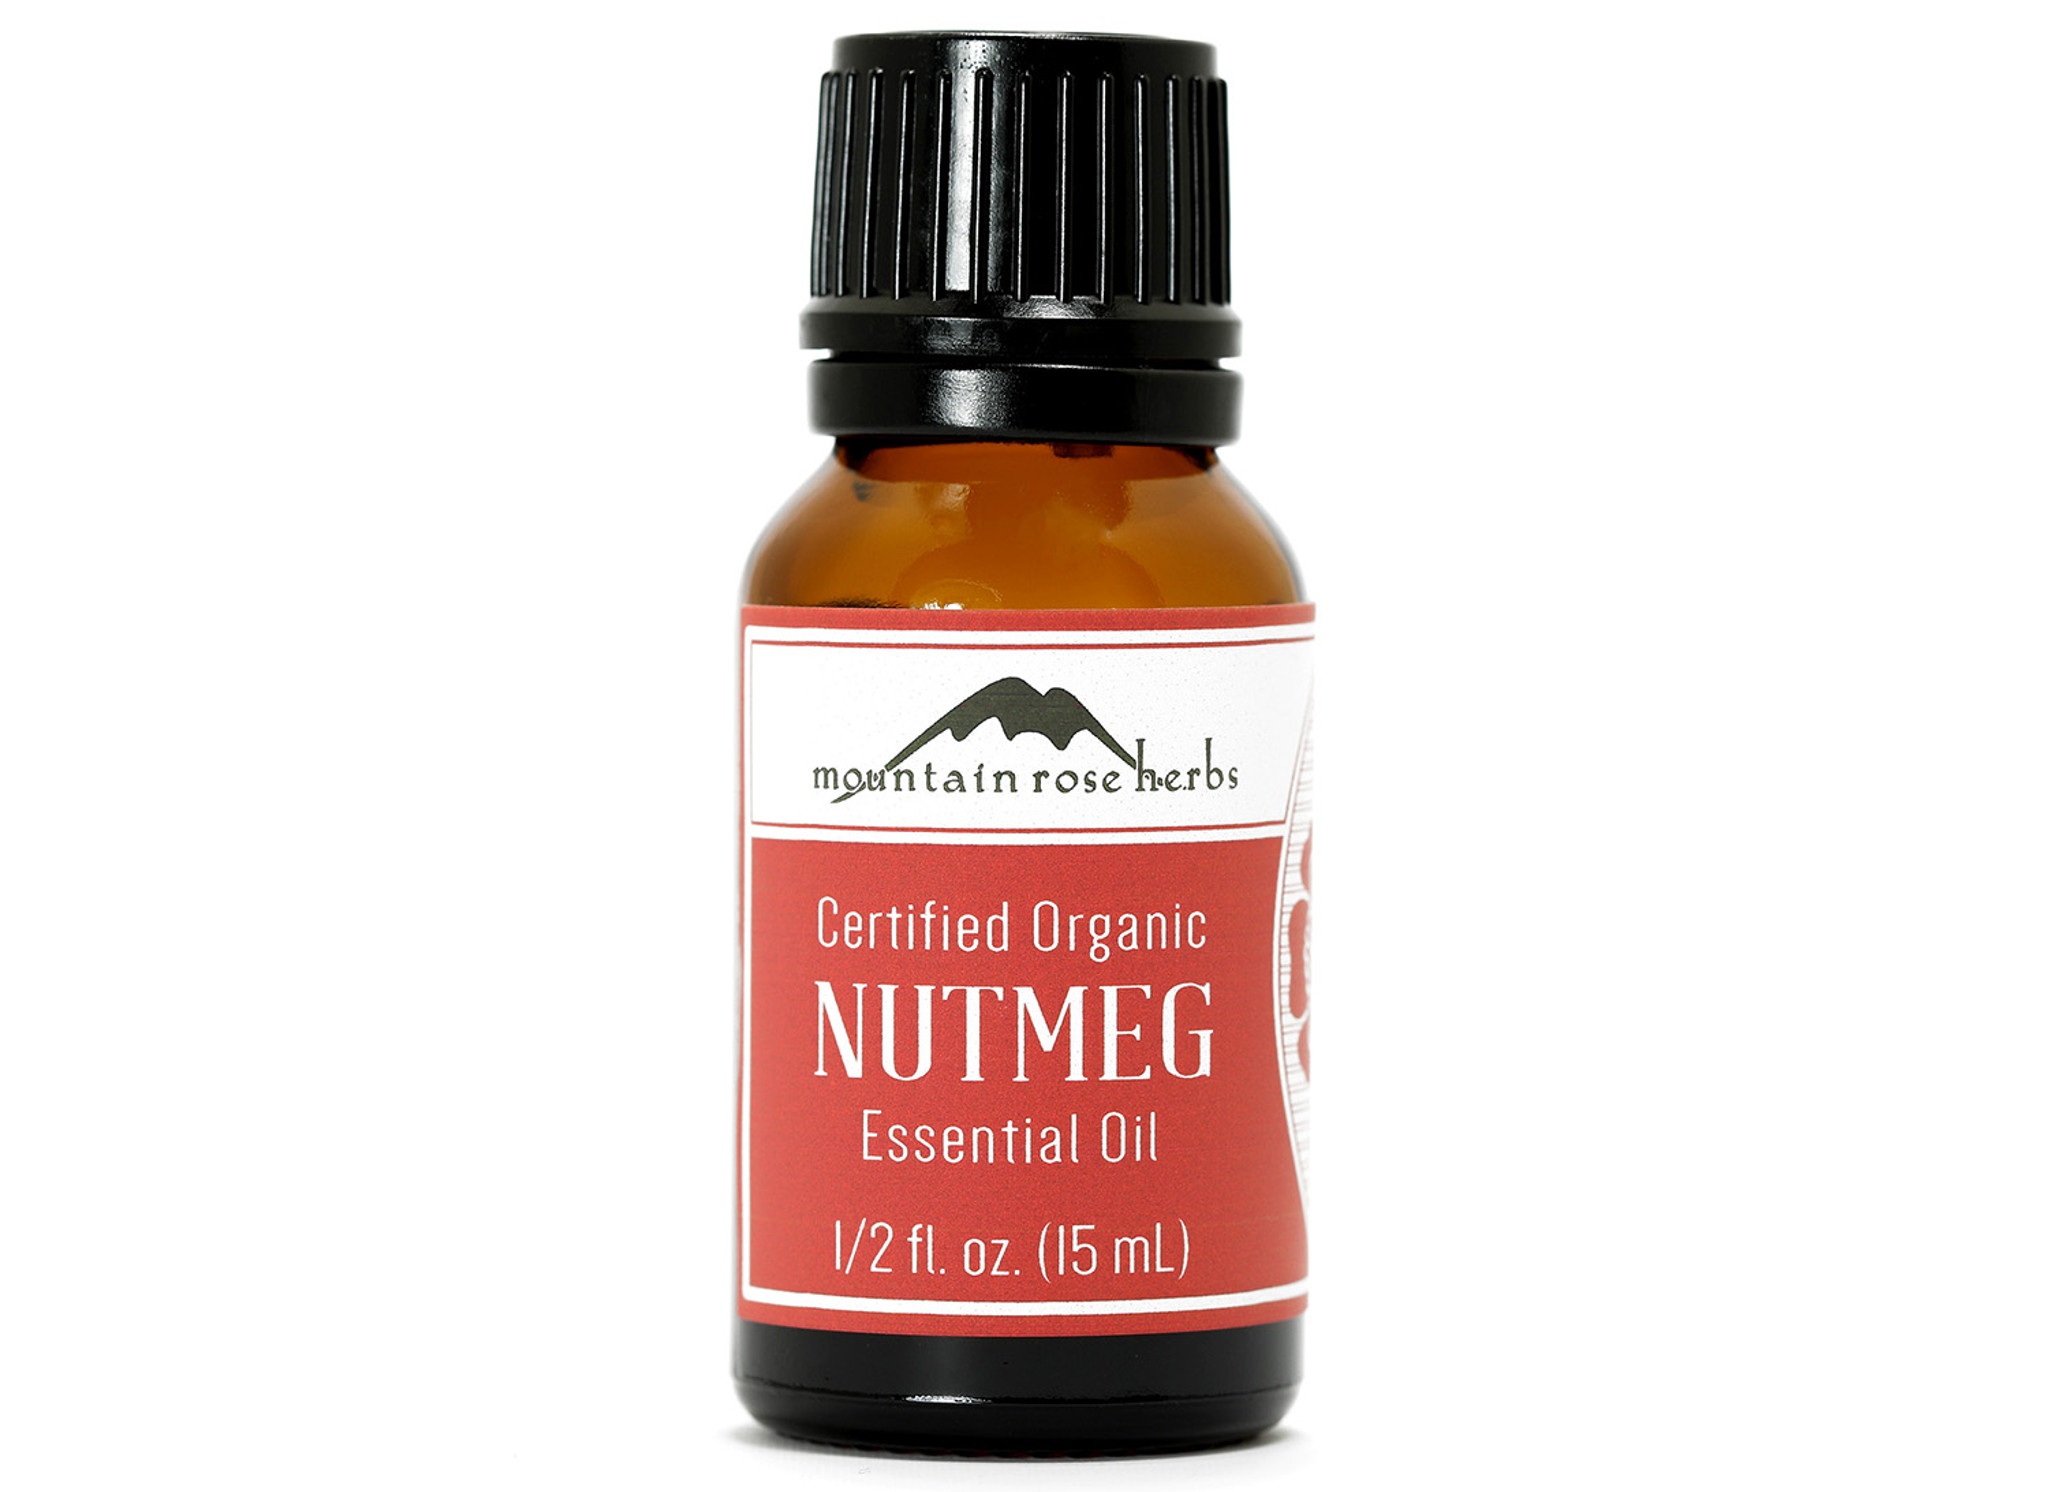 Nutmeg Essential Oil- The Energizer! - A Real Food Journey